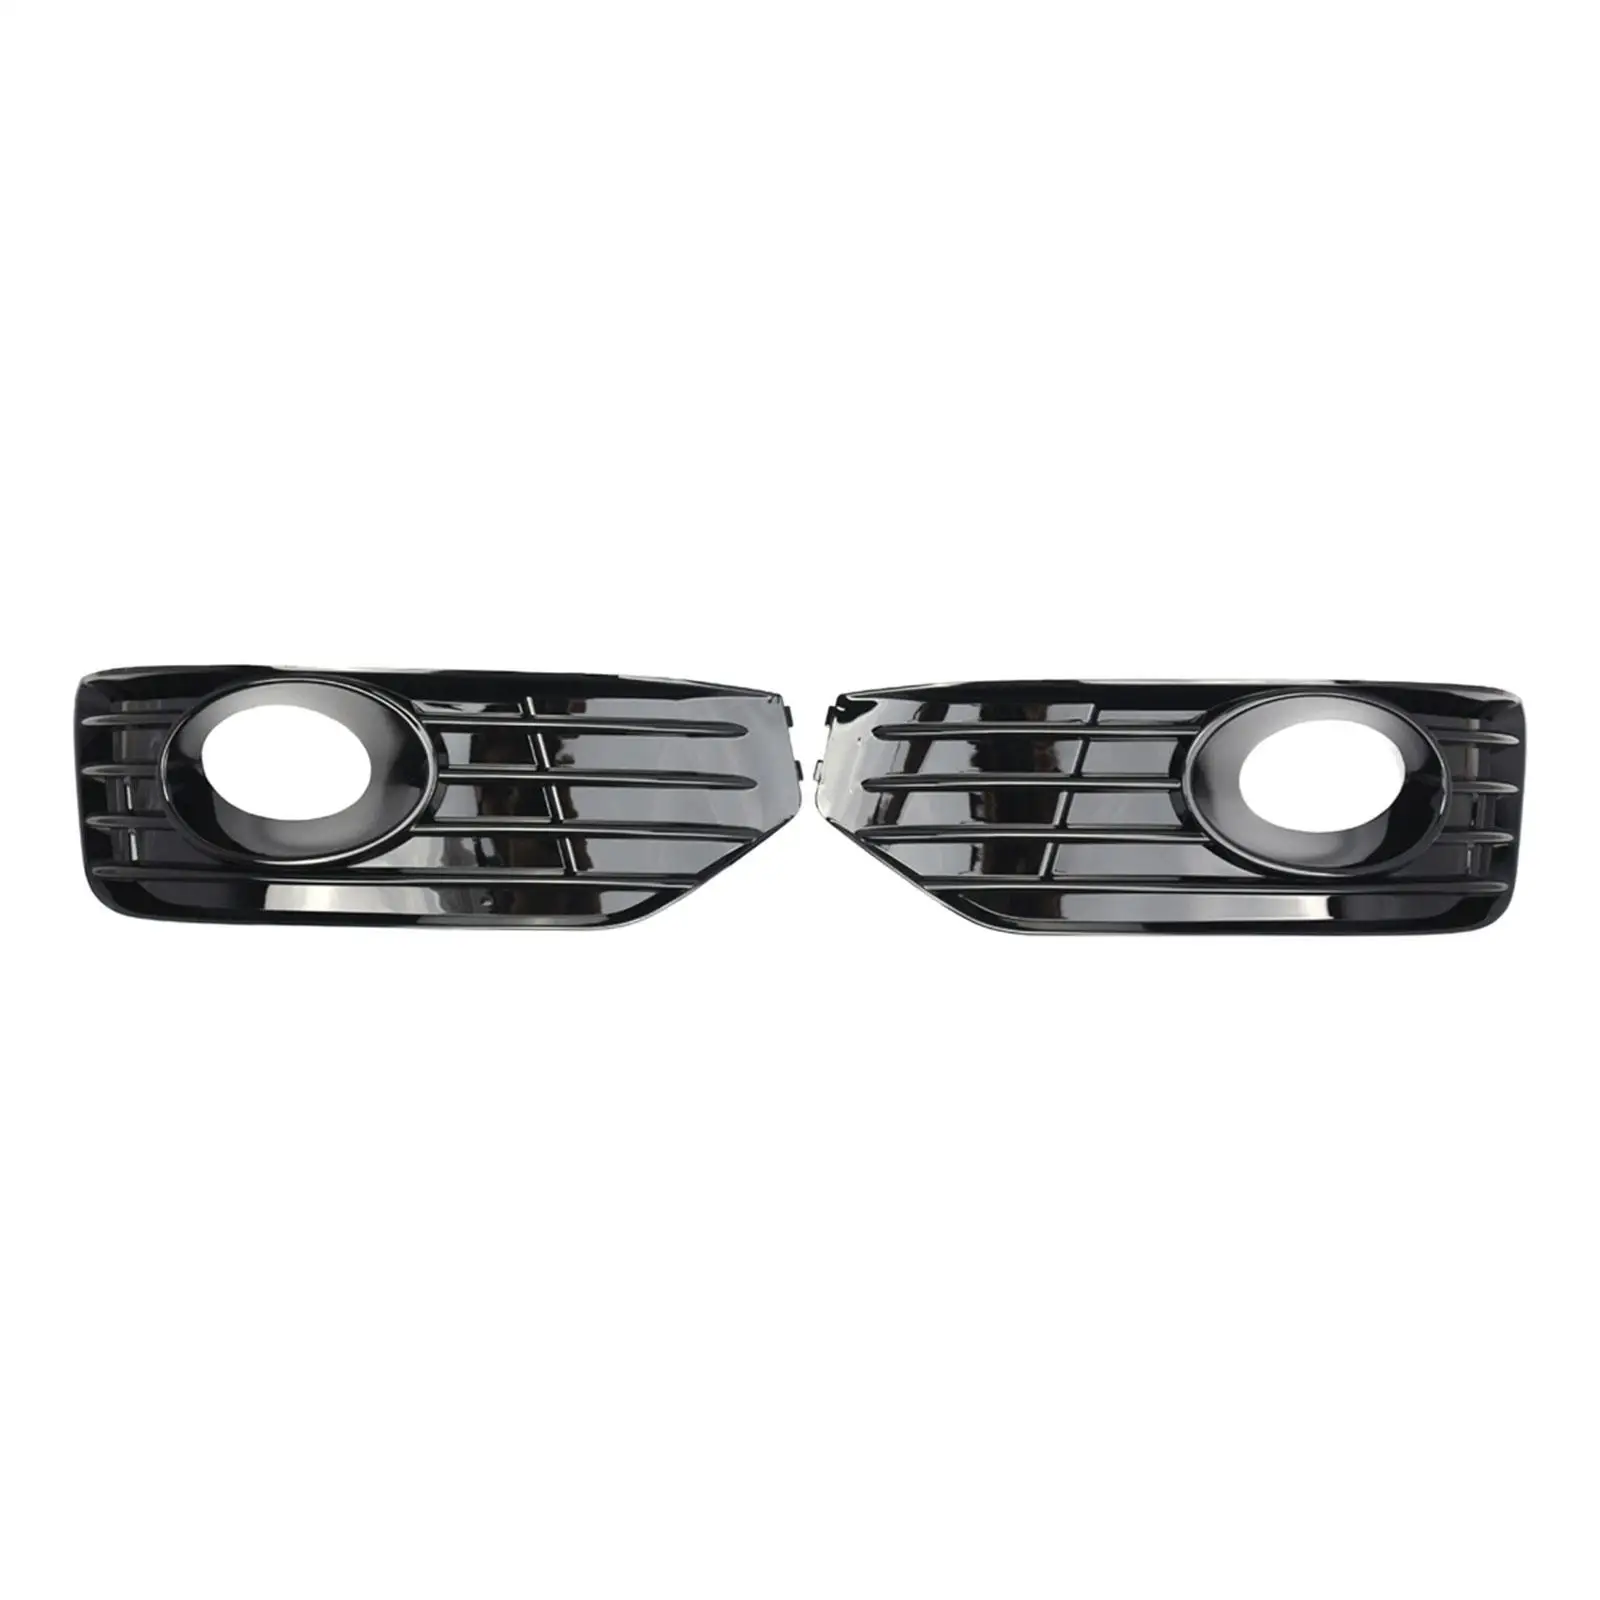 2x Fog Light Grille Covers Easy to Install Accessories Wear Resistant Fog Lamp Cover Insert for VW T5.1 Sportline 2010-2015